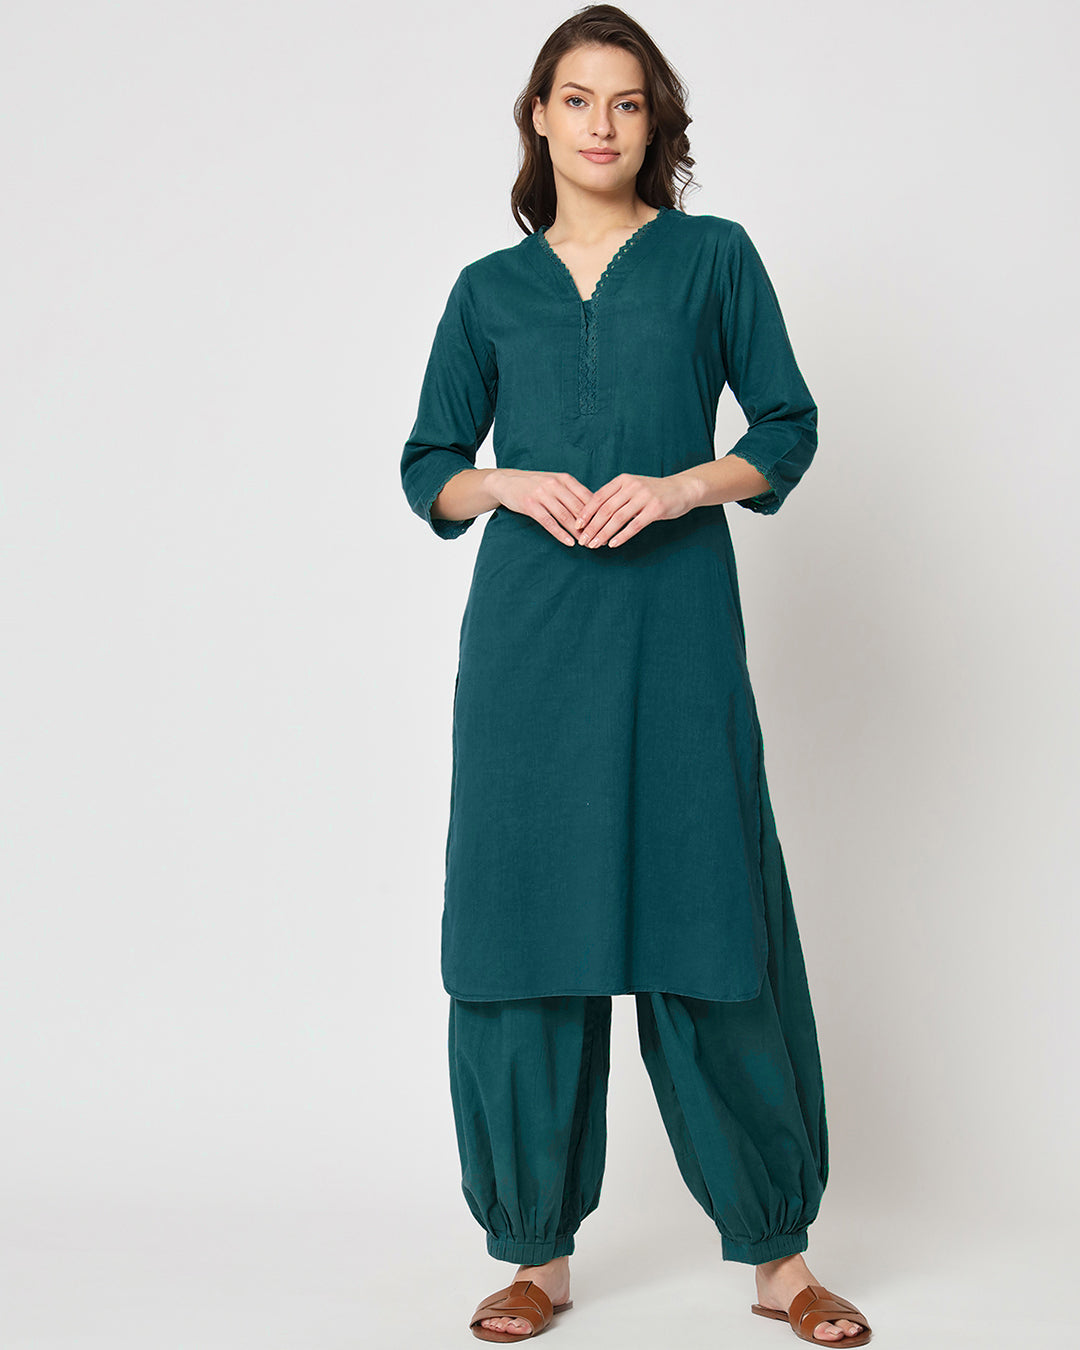 Deep Teal Lace Affair Solid Kurta (Without Bottoms)